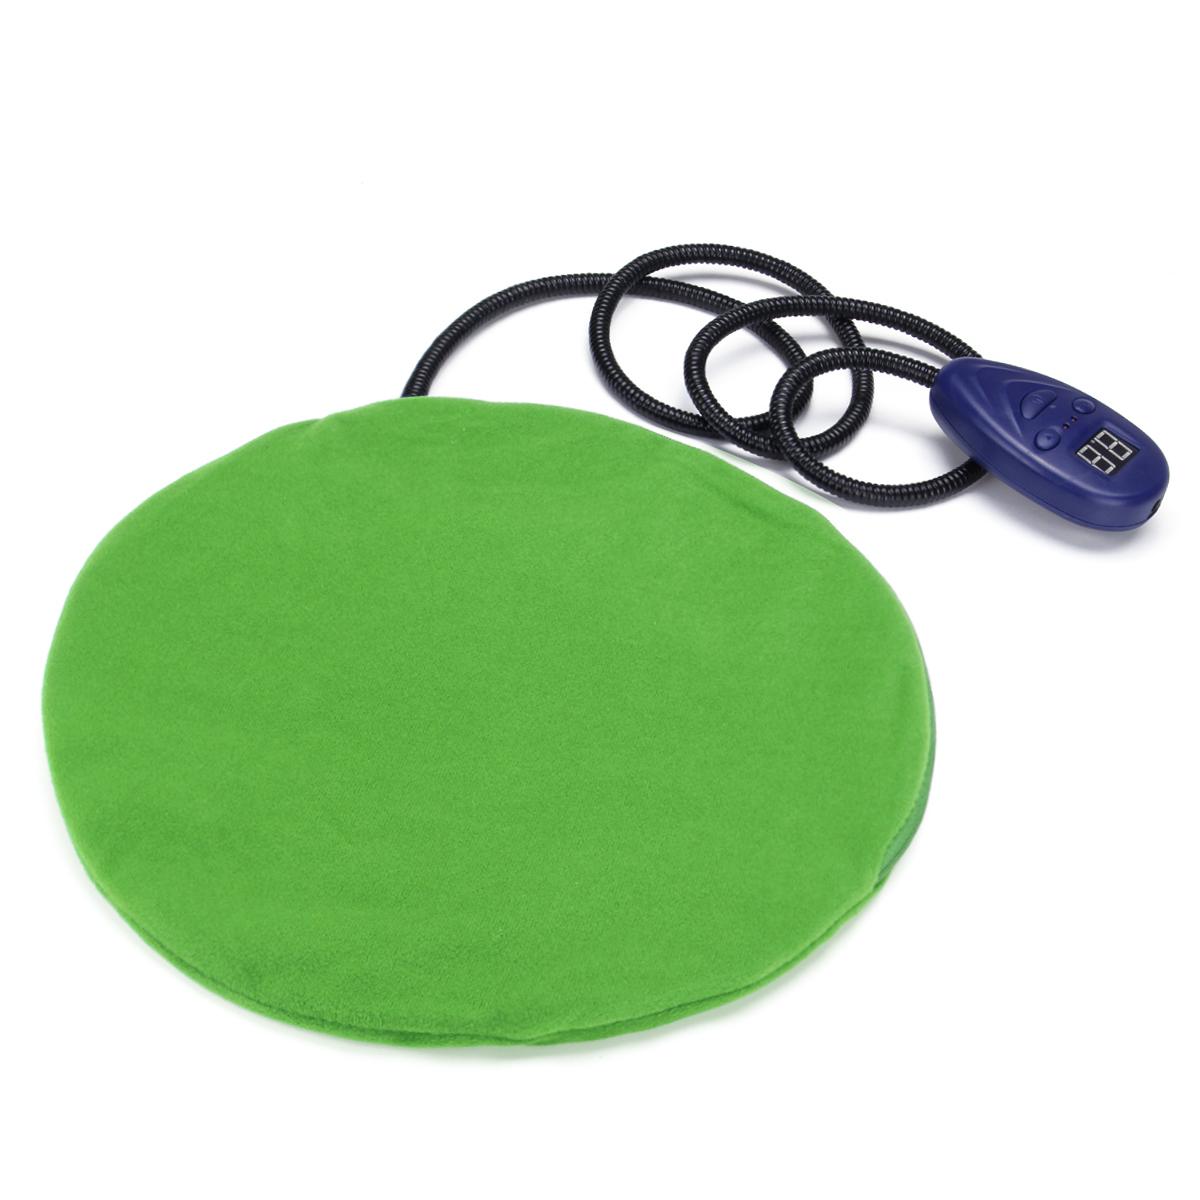 

12V Pet Dog Heating Heated Pad Mat Waterproof Electric Pad Heater Thermal Protection Bed EU Plug